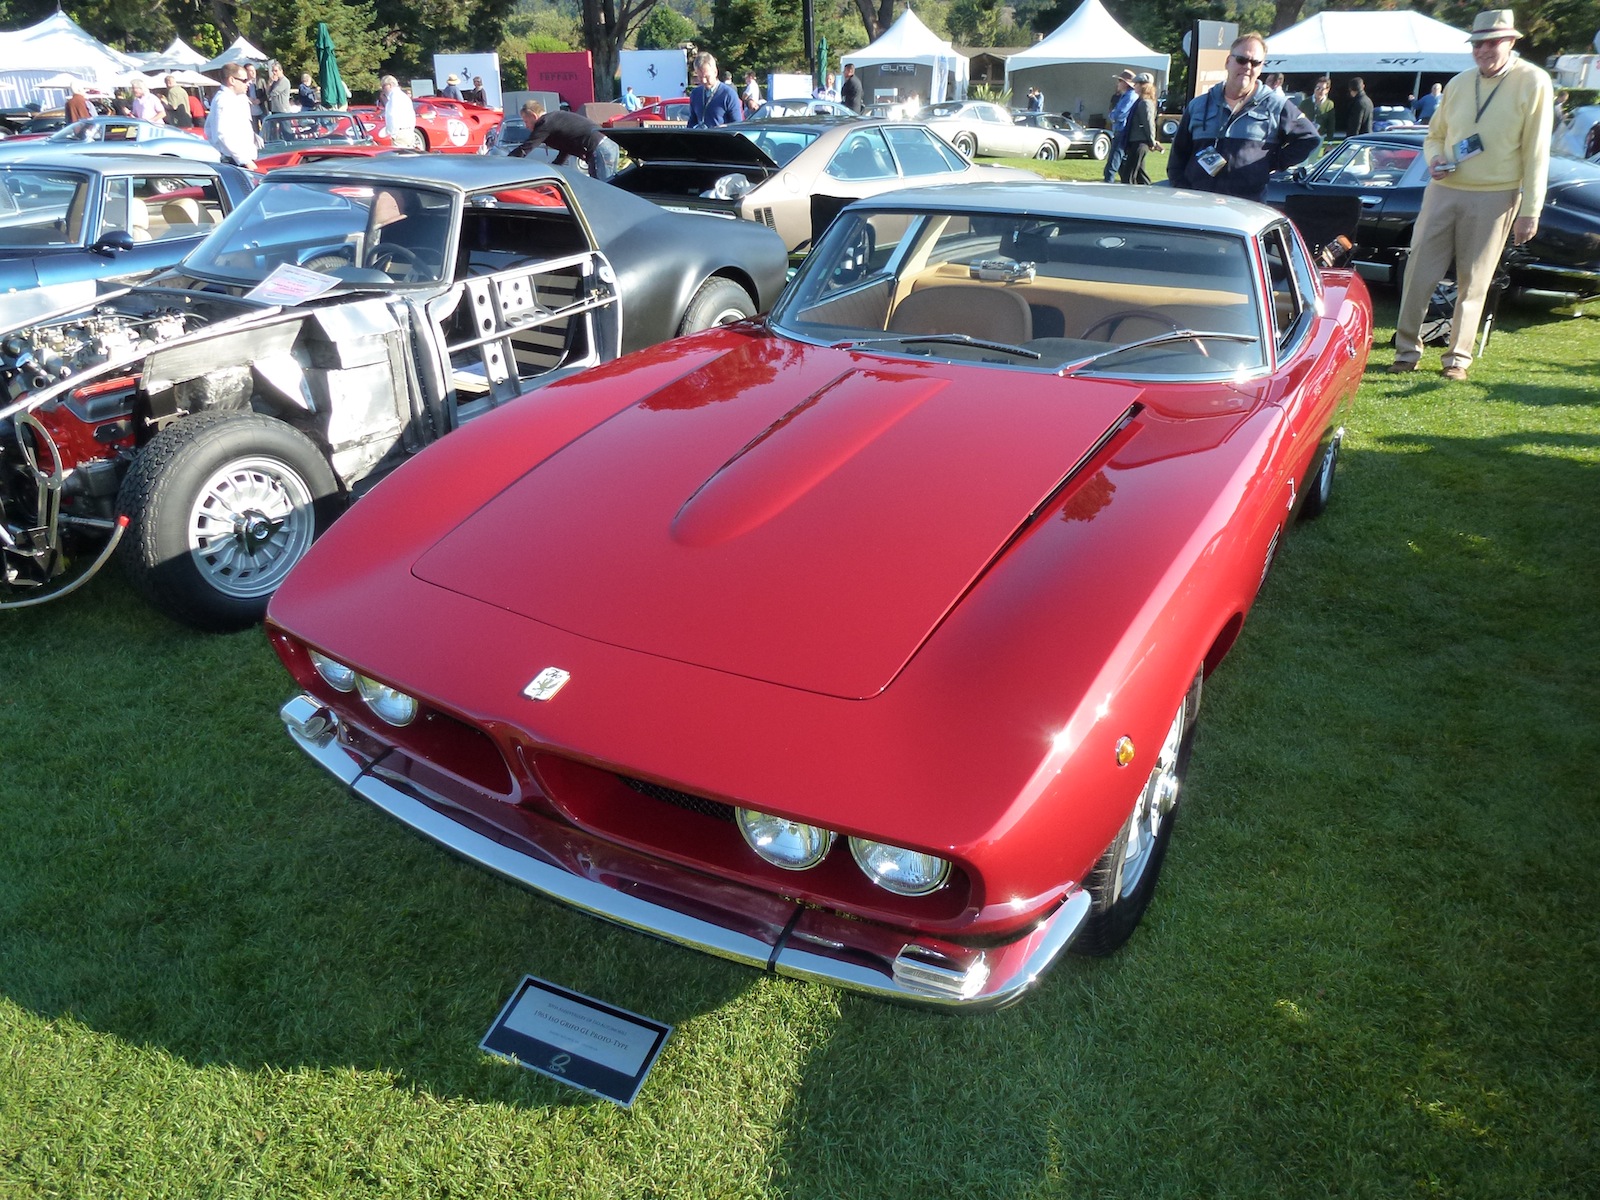 Rolling Sculpture - The Iso Grifo